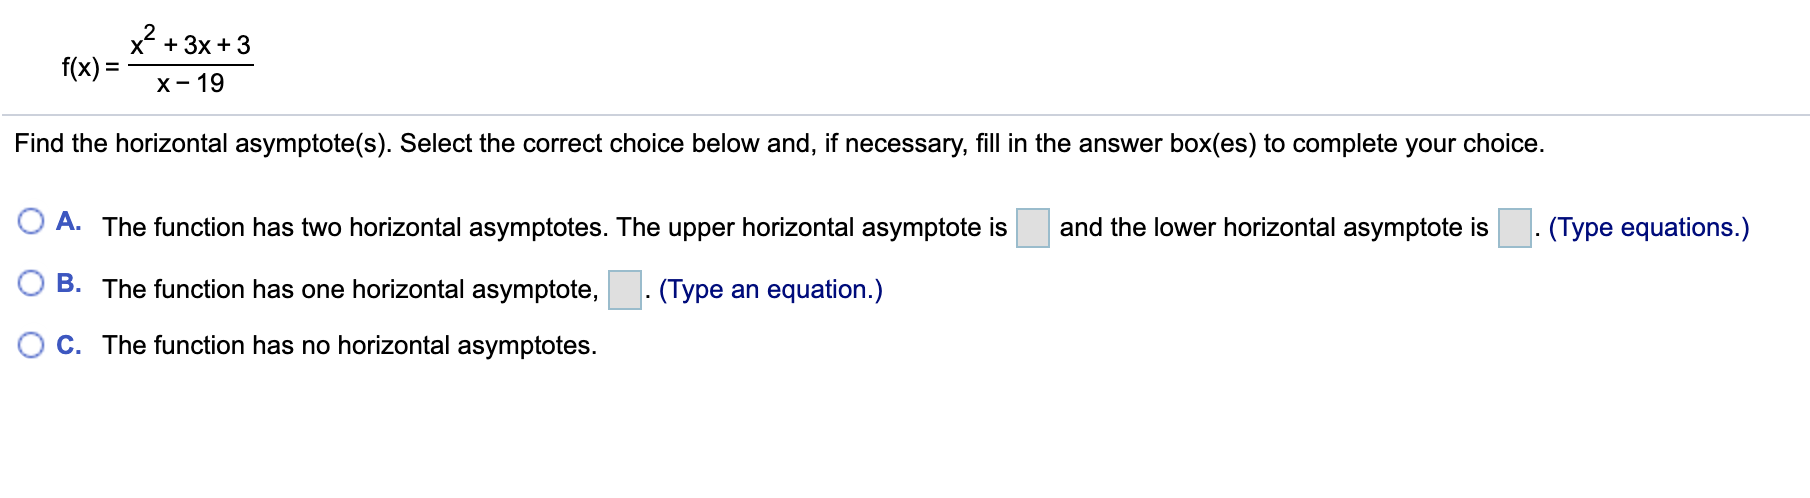 x + 3x + 3
f(x) =
х - 19
Find the horizontal asymptote(s). Select the correct choice below and, if necessary, fill in the answer box(es) to complete your choice.
O A. The function has two horizontal asymptotes. The upper horizontal asymptote is
and the lower horizontal asymptote is
(Type equations.)
B. The function has one horizontal asymptote,
. (Type an equation.)
C. The function has no horizontal asymptotes.
